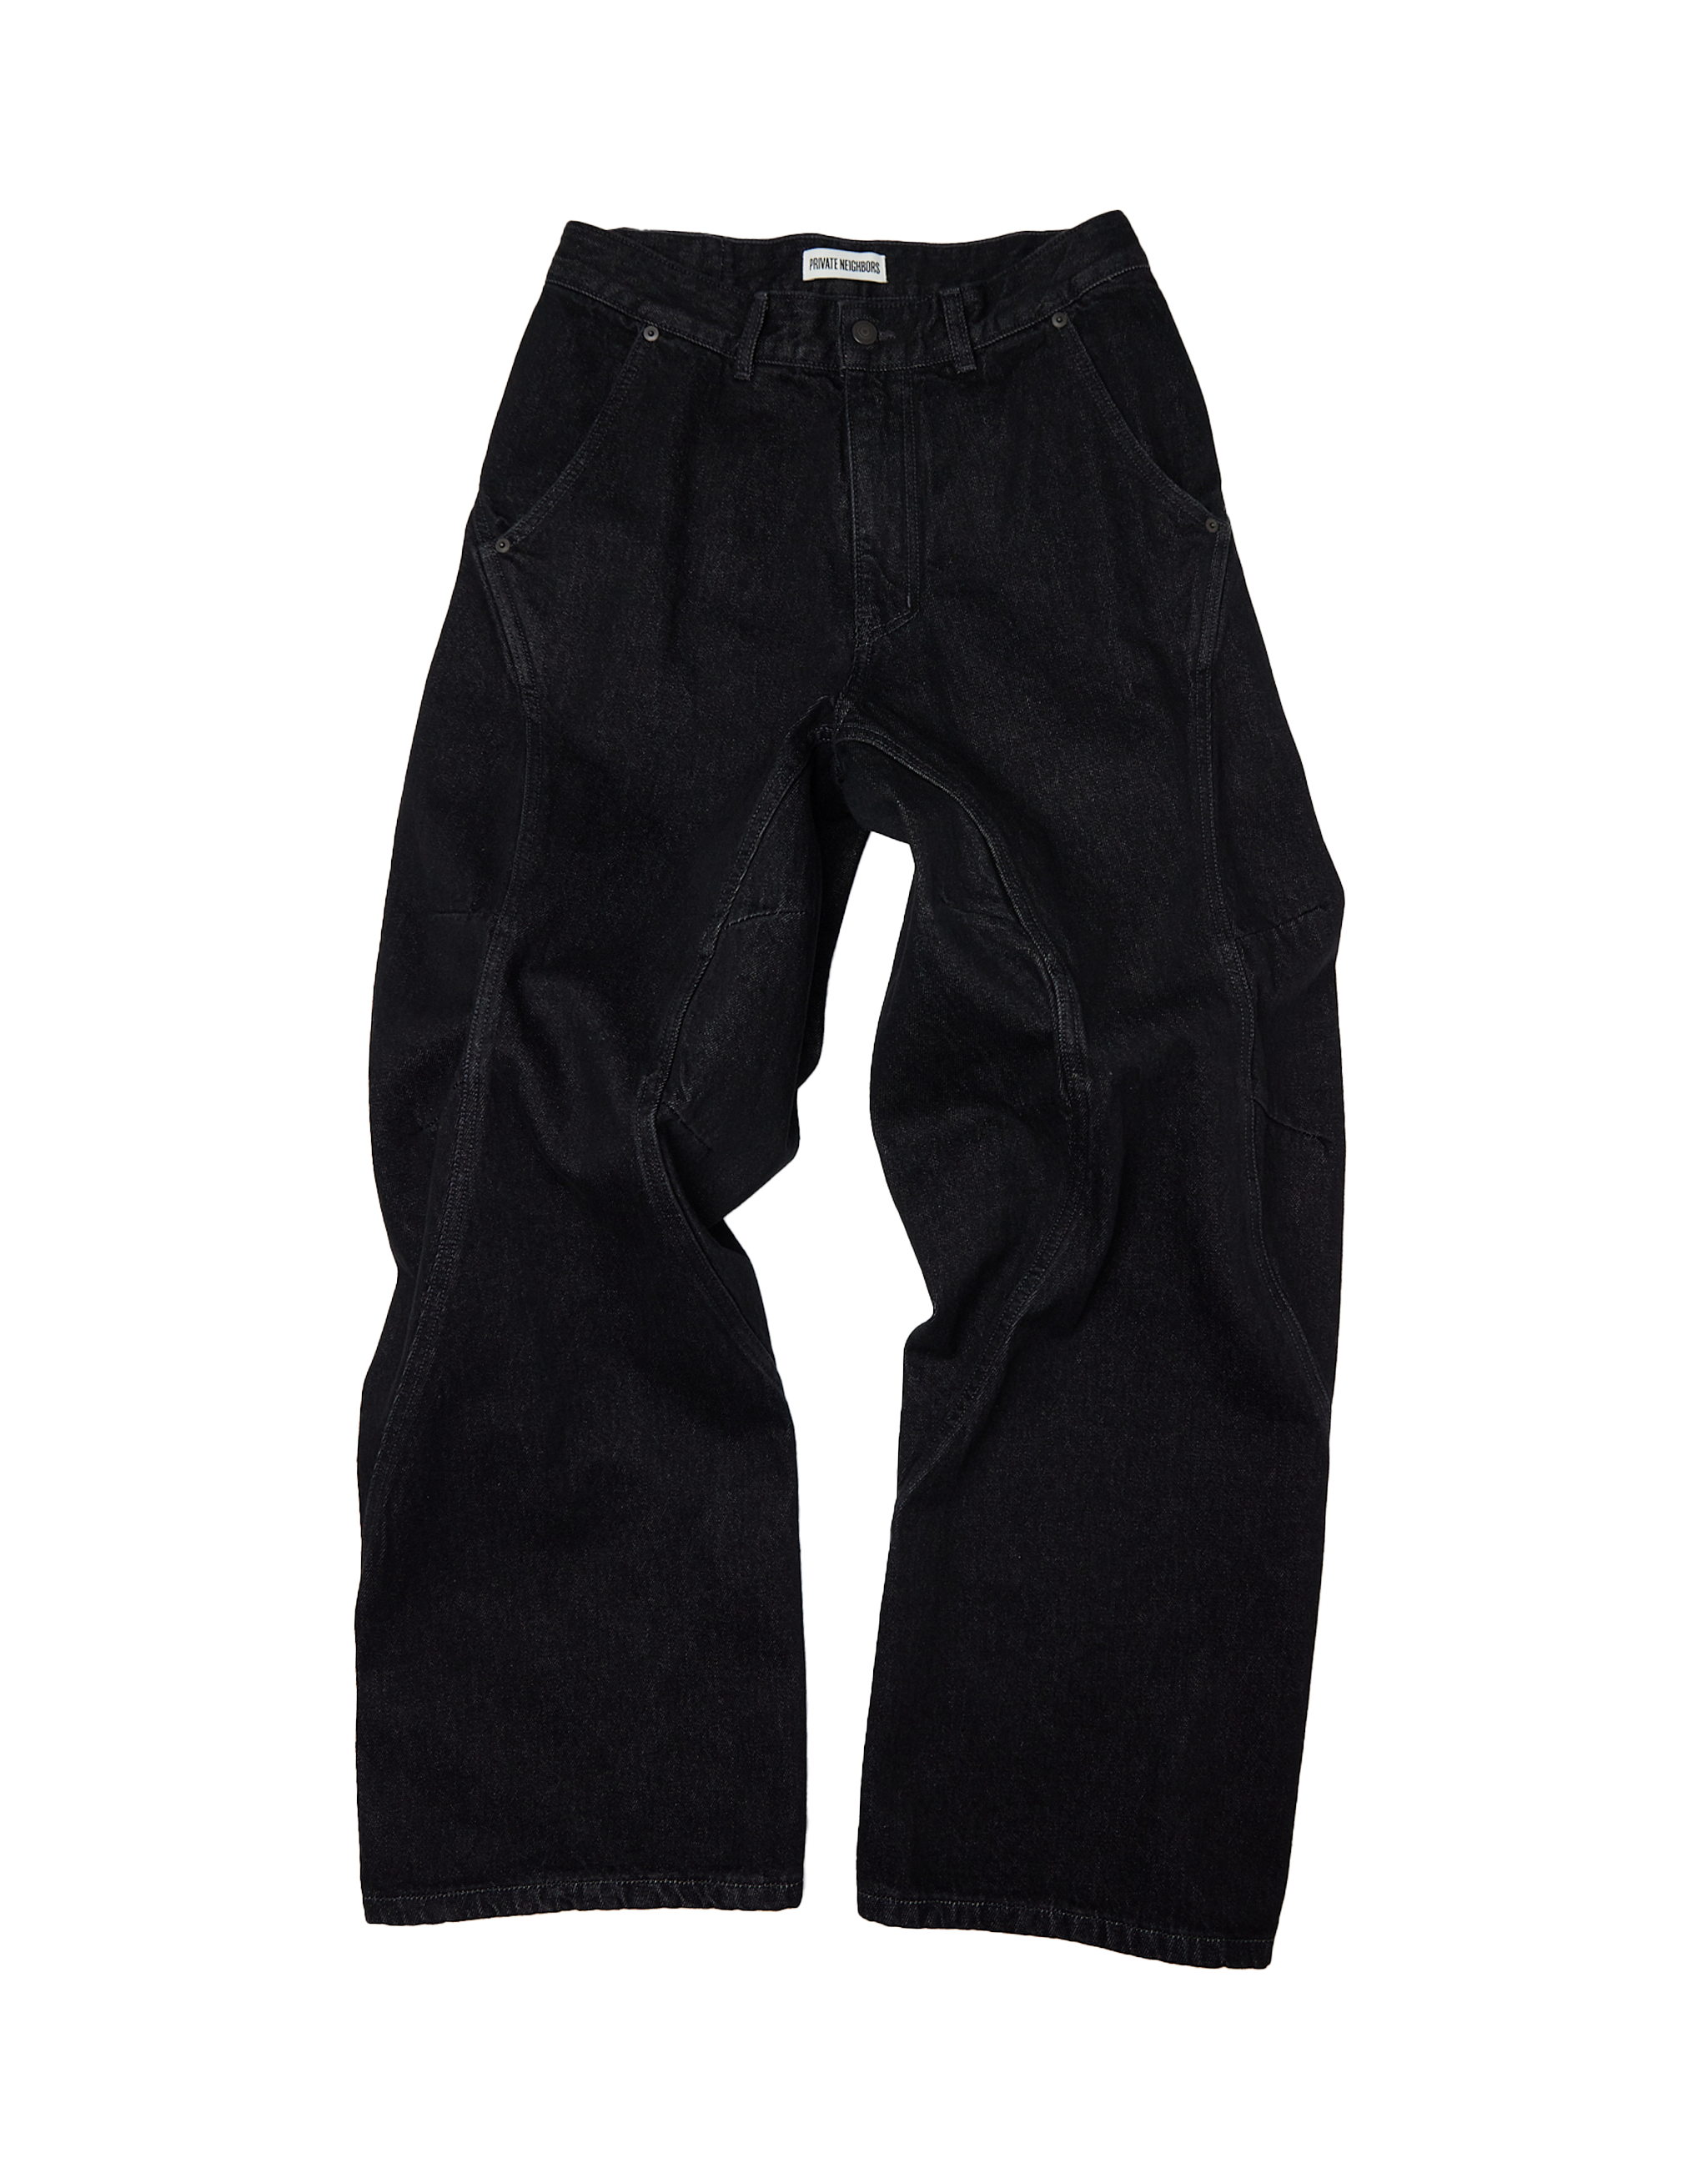 Engineered Jeans-Washed Black